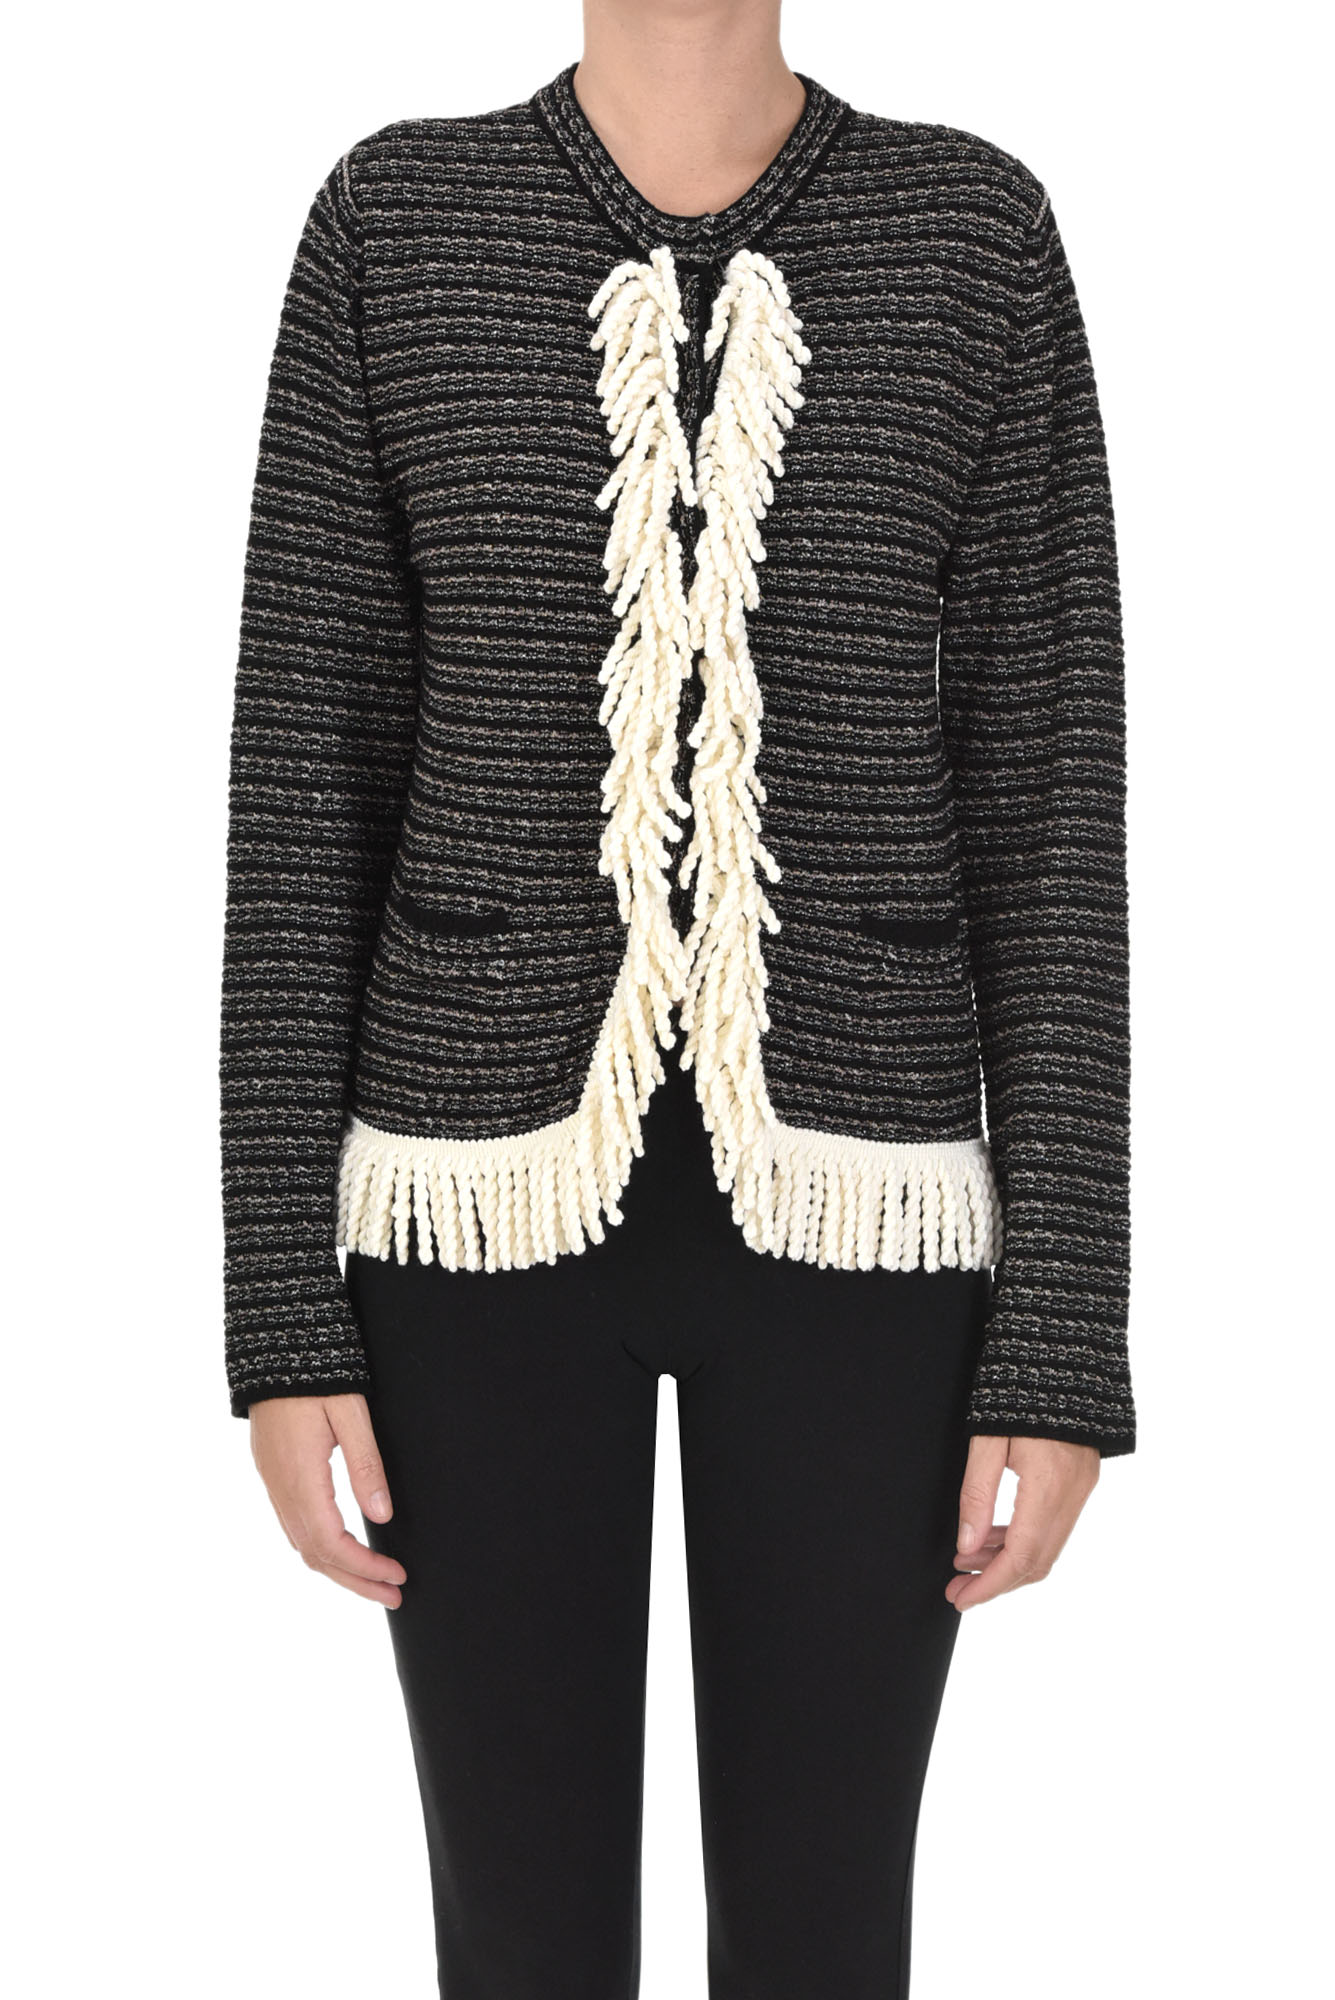 Chanel inspired Boucle Jacket  Just A Little Tee